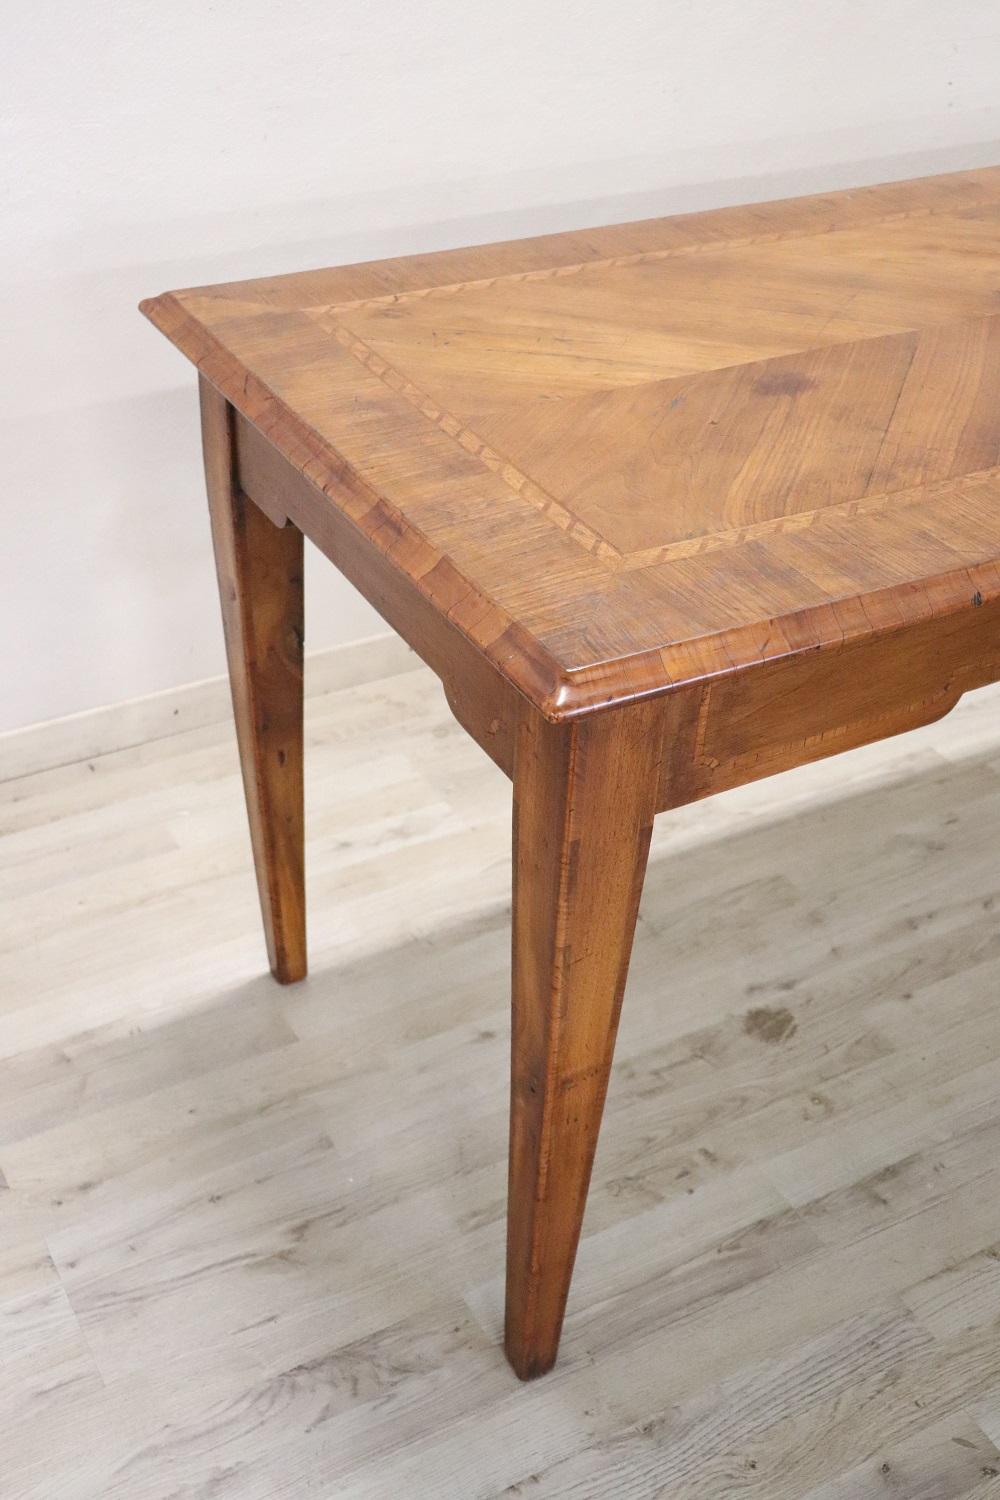 Beautiful important antique long dining room table, 1850s in solid walnut wood. Characterized by a refined inlay work on the top in a geometric style with a central medallion. Very simple and linear, perfect also for a modern environment. This table